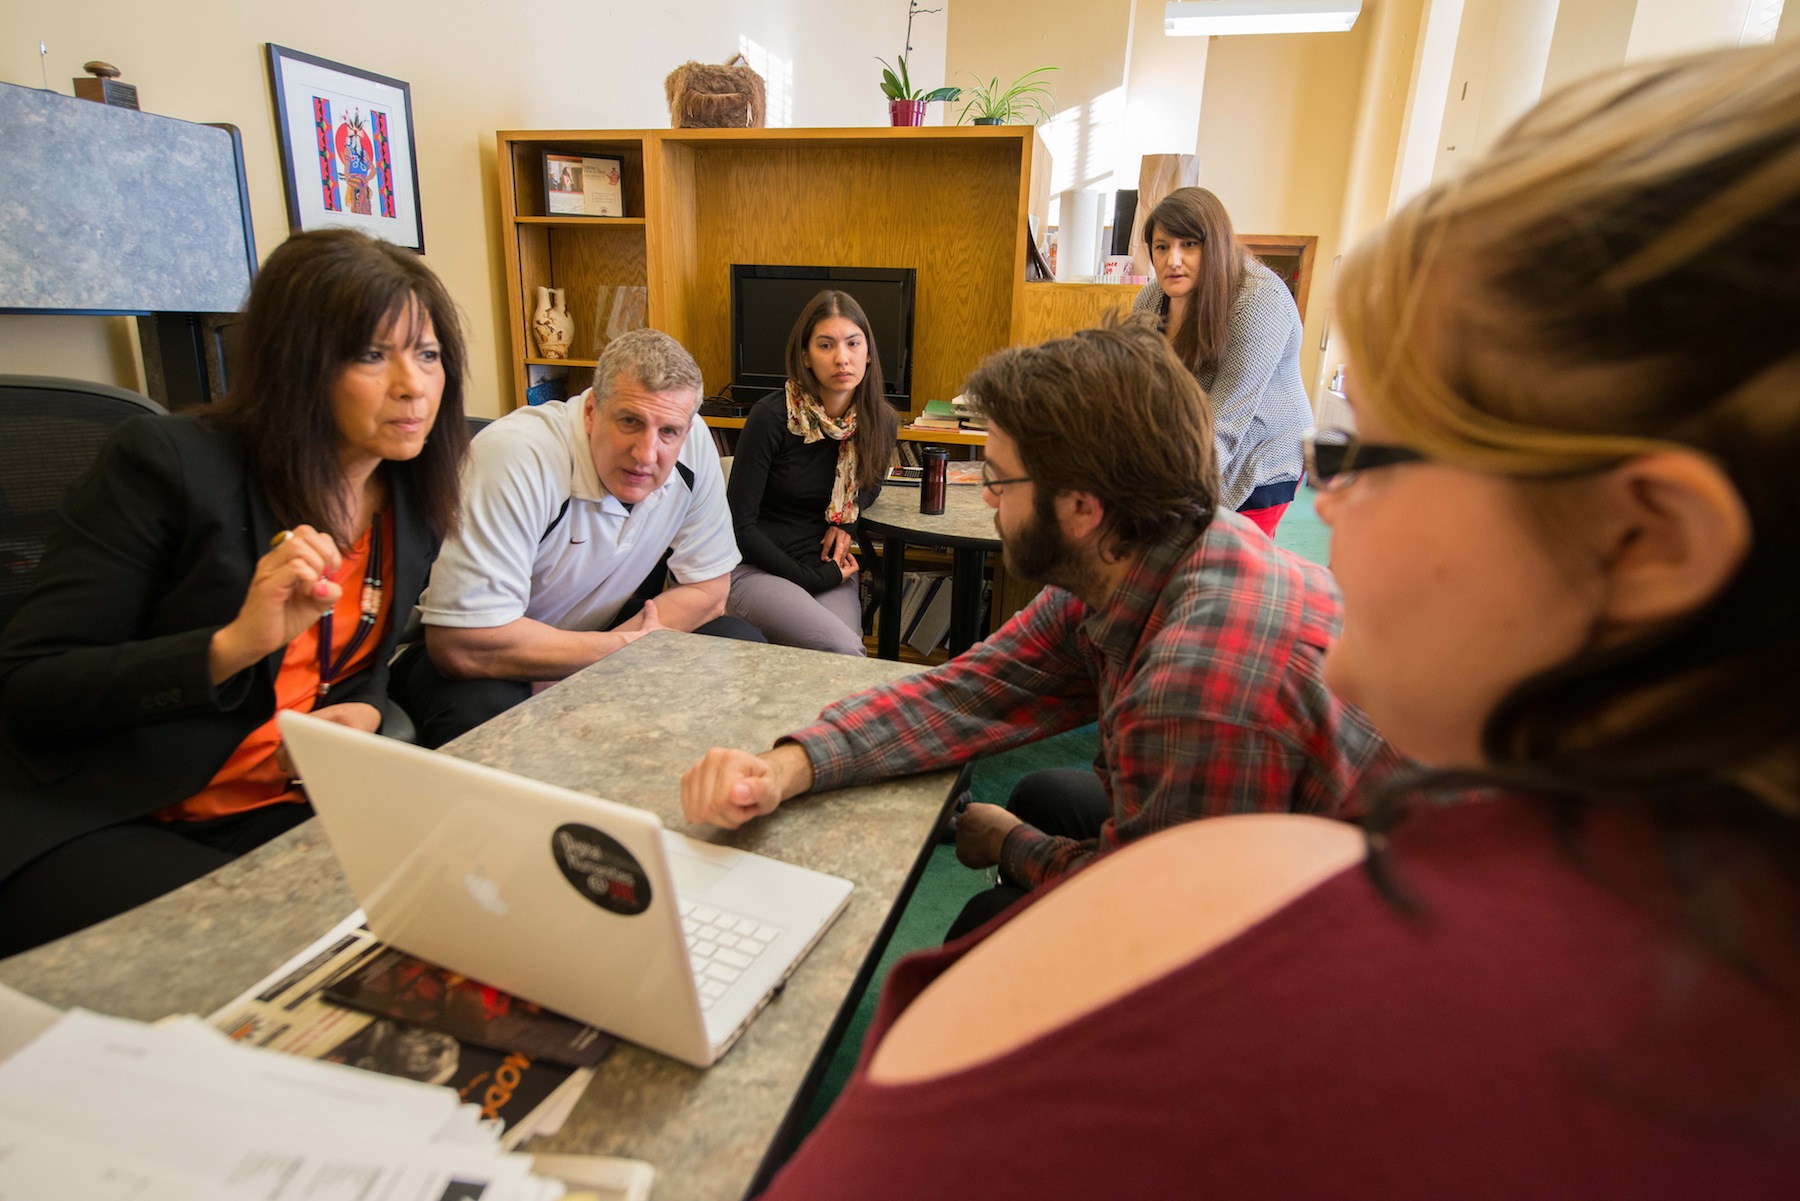 Students at the University of Nebraska-Lincoln work with the Nebraska Commission on Indian Affairs on a deep map of the Standing Bear Historic Trail. Pictured, from left, are: Judi gaiashkibos, executive director for NCIA; Scott Shafer, administrative assistant for NCIA; Naomi Szpot, administrative secretary for NCIA; Joseba Moreno, graduate student, University of Nebraska-Lincoln; Alicia Harris, administrative secretary for NCIA; and Erin Carr, University of Nebraska-Lincoln student. (University of Nebraska-Lincoln)